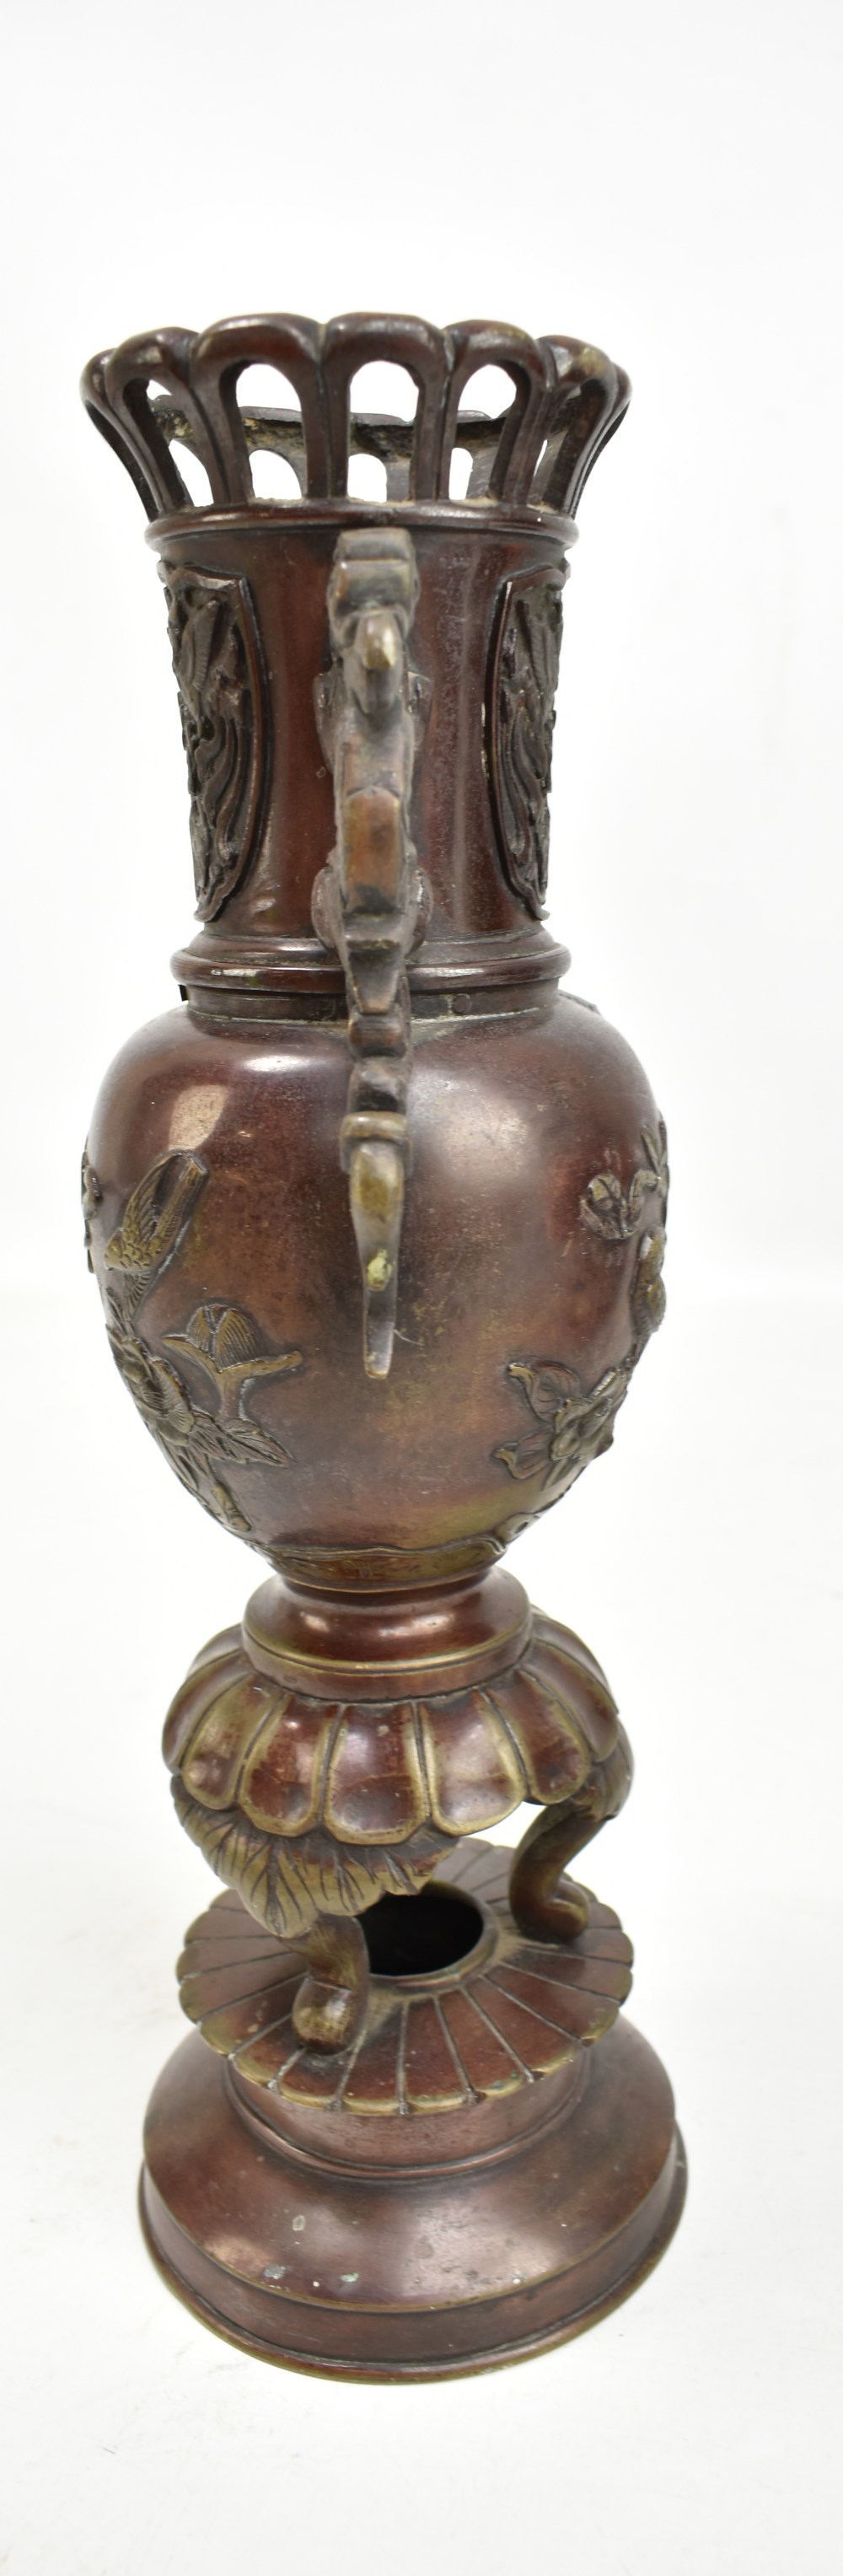 A pair of late 19th/early 20th century Japanese patinated bronze vases with cast twin dragon - Image 9 of 13